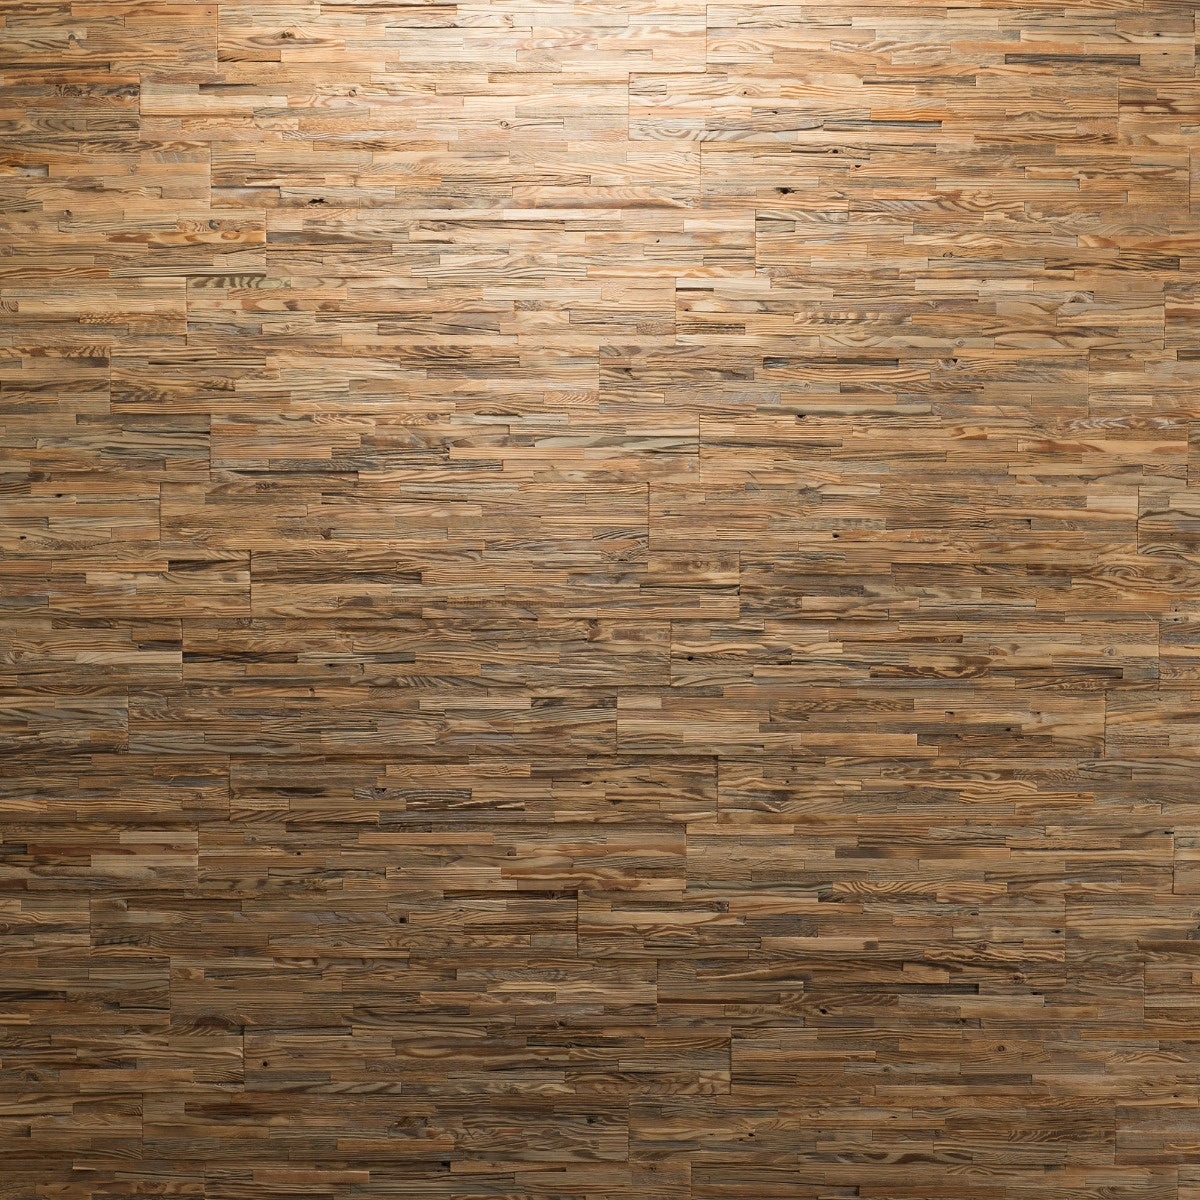 Wooden Wall Decorative panel Brut